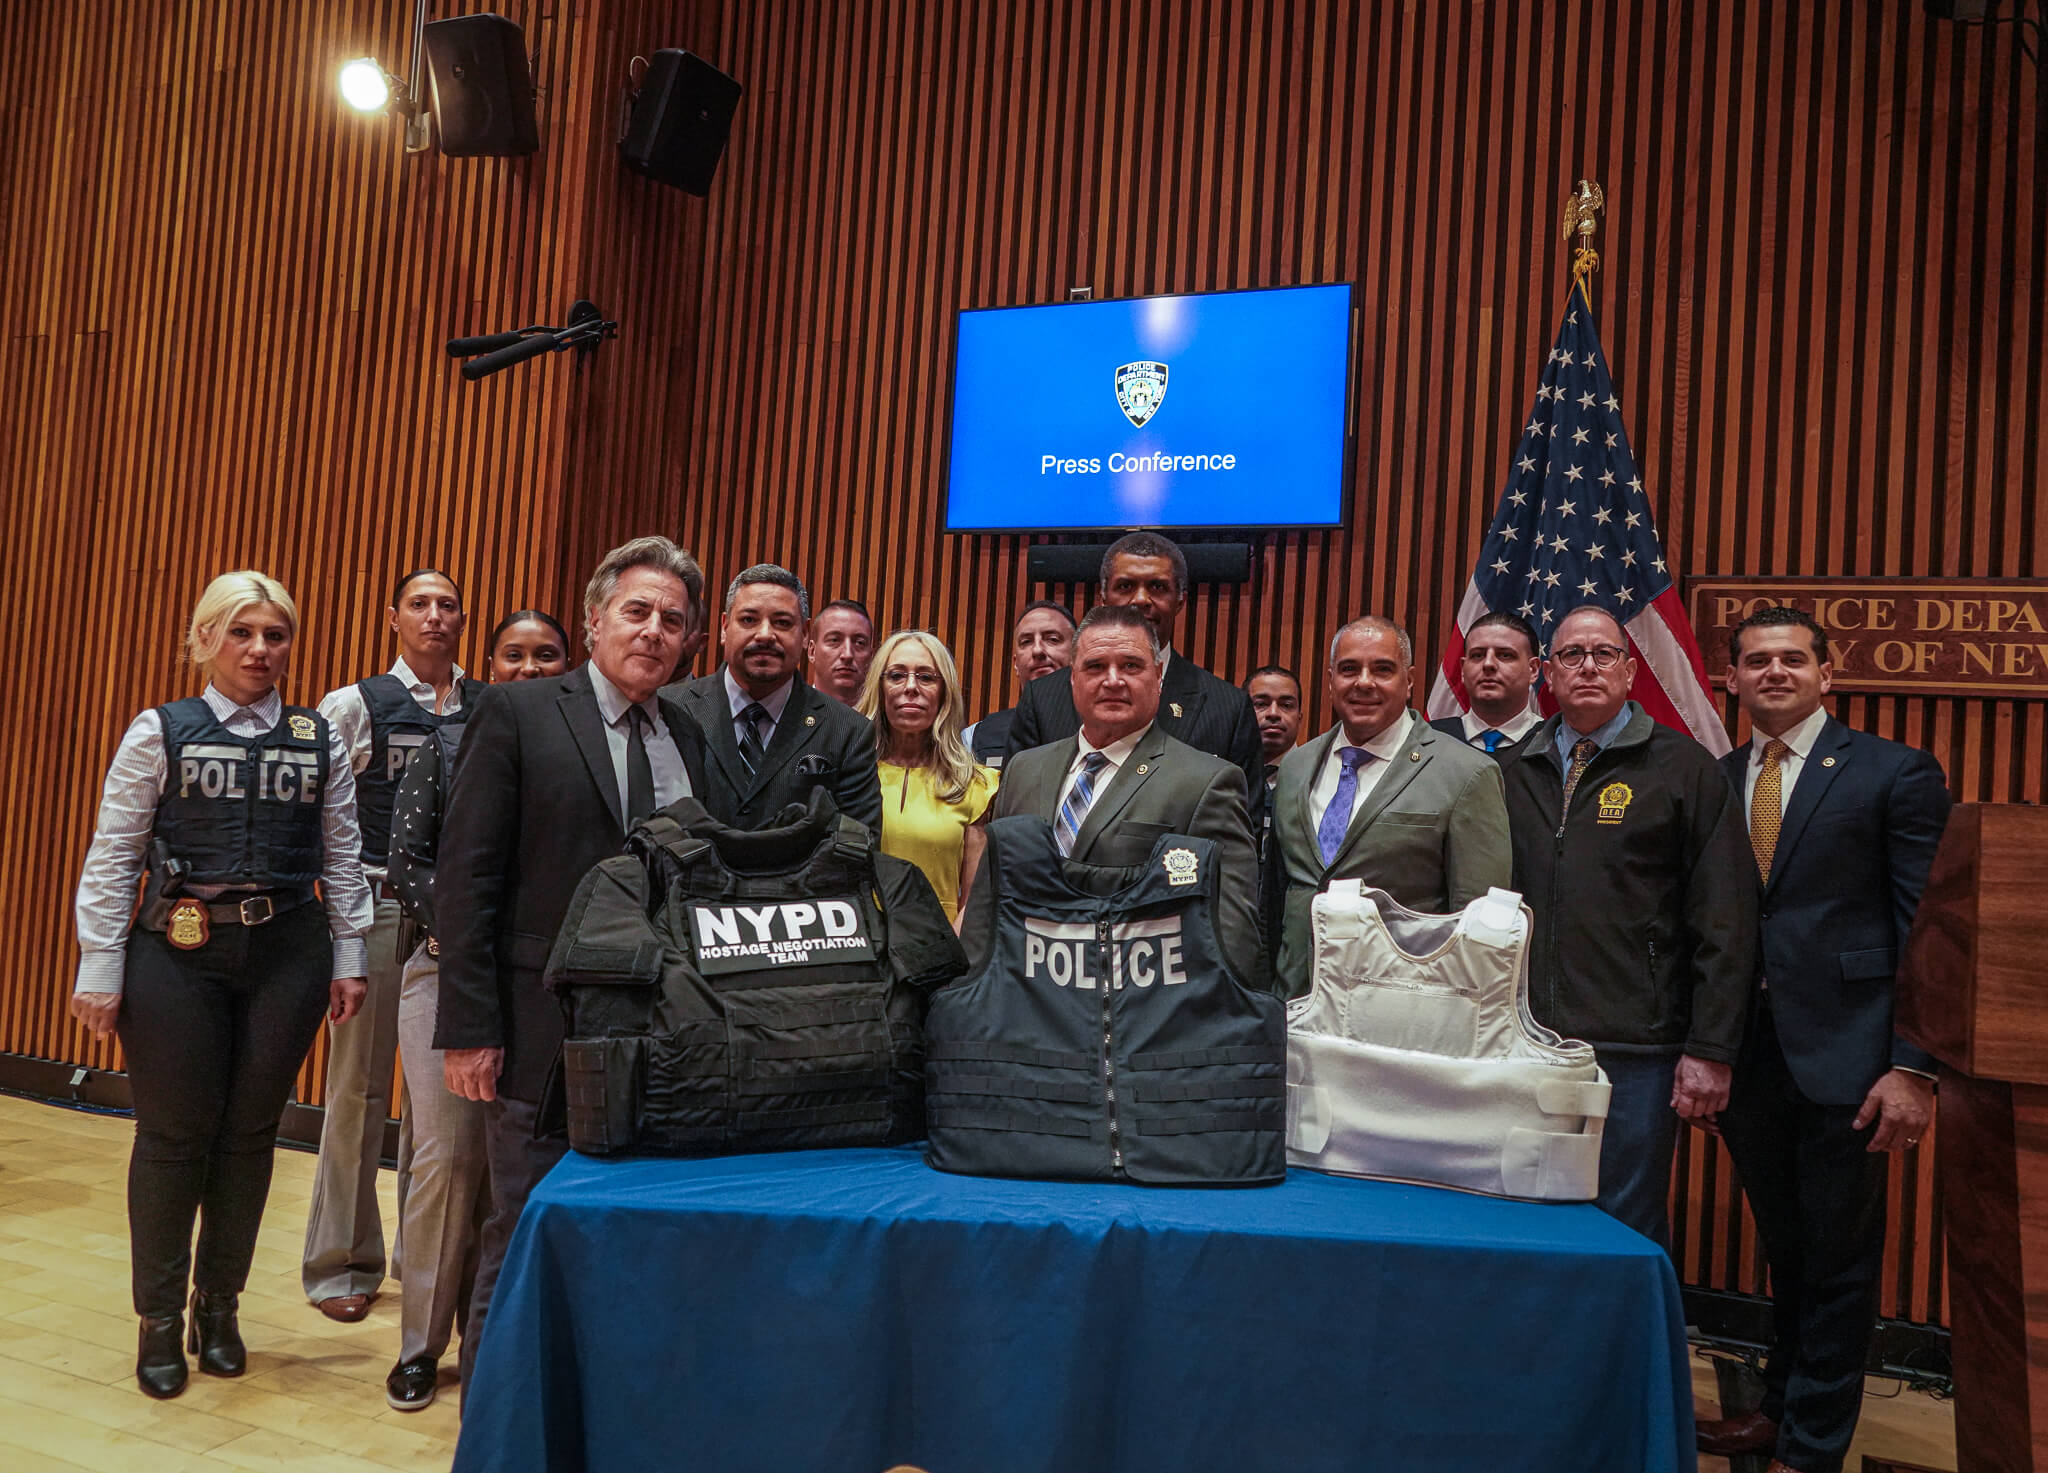 Built different: NYPD unveils new bulletproof vests for detectives